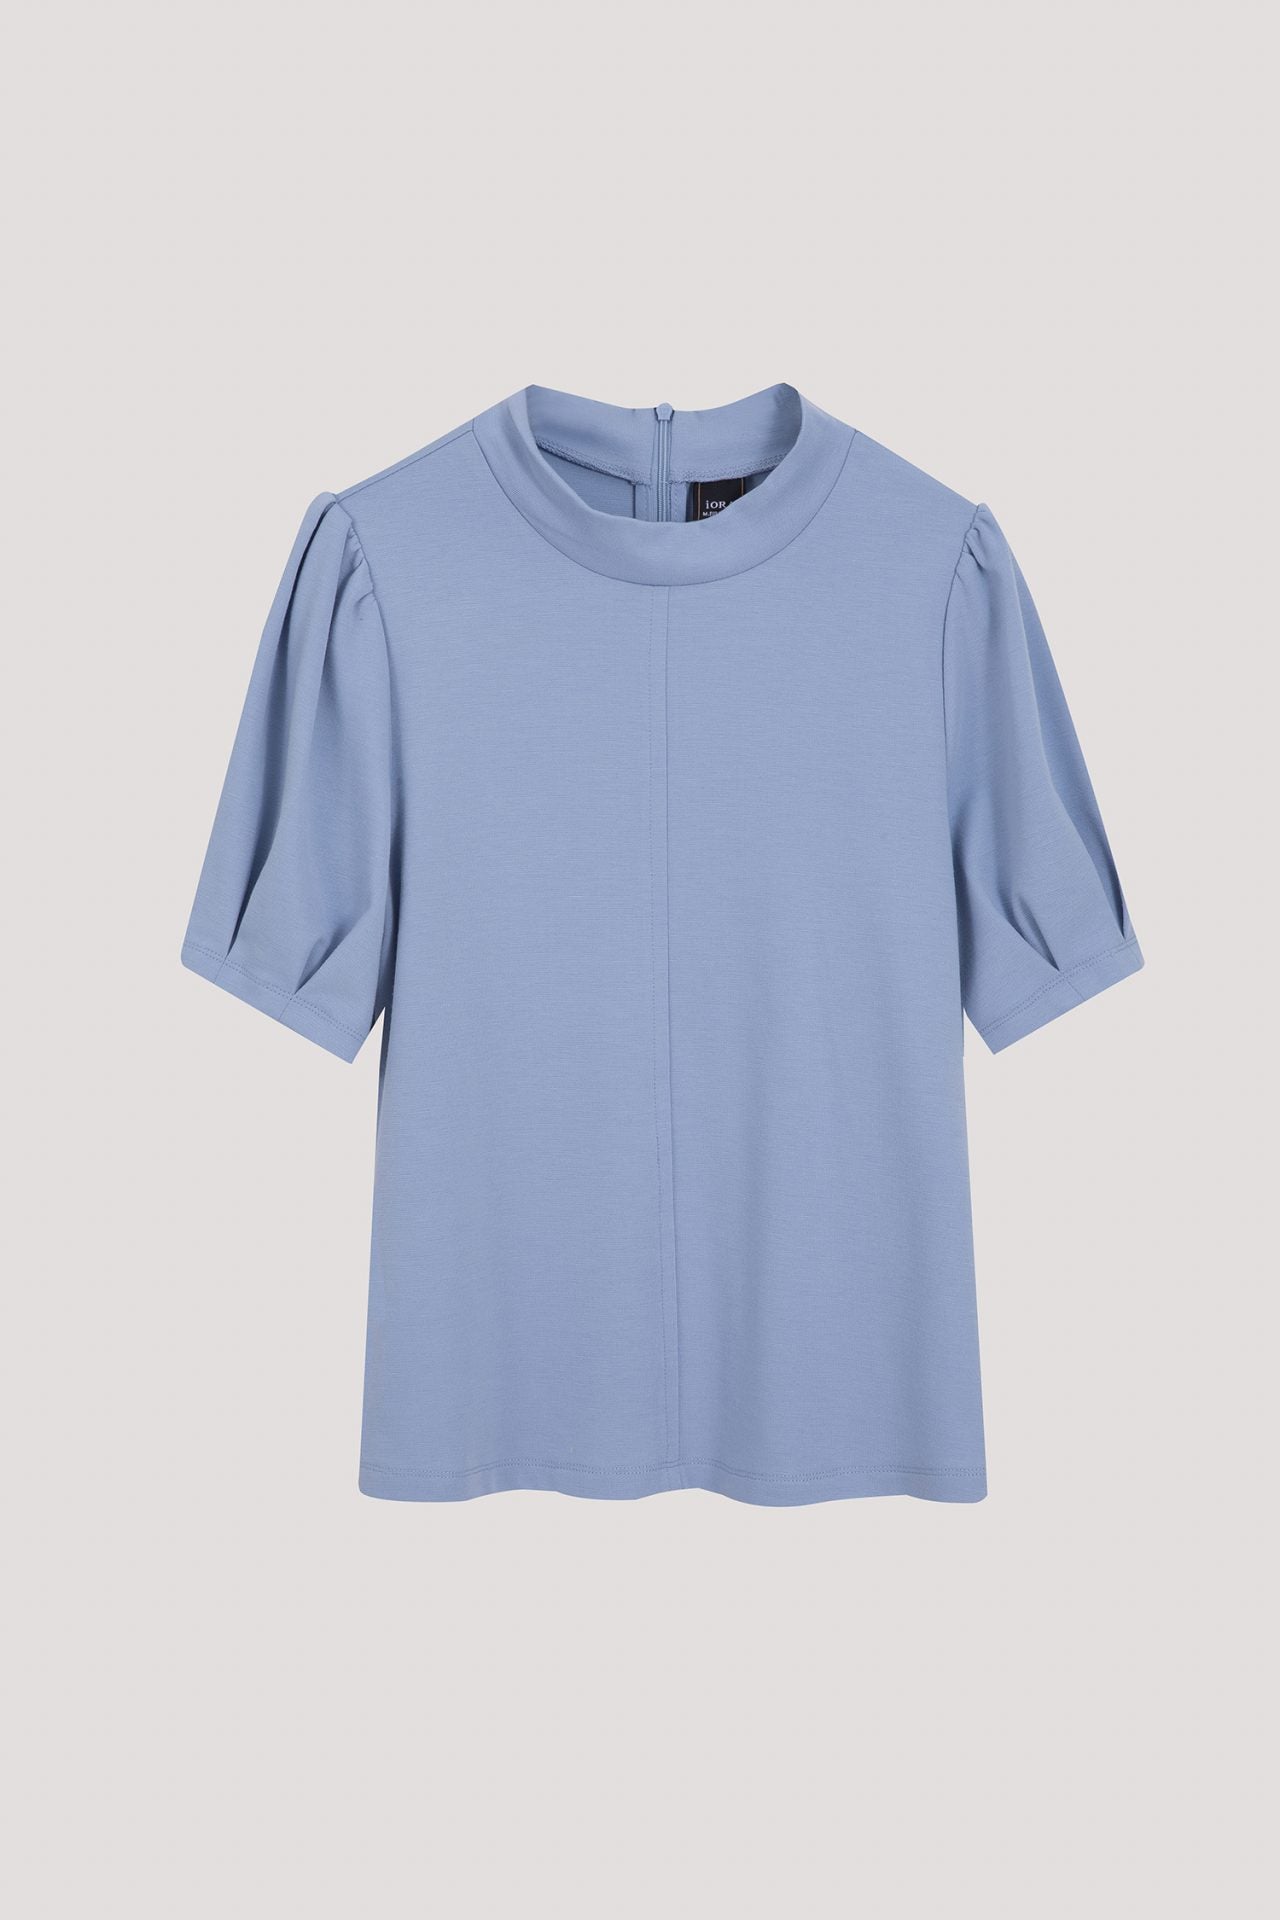 AT 10878 RUCHED SLEEVE TOP SKY BLUE